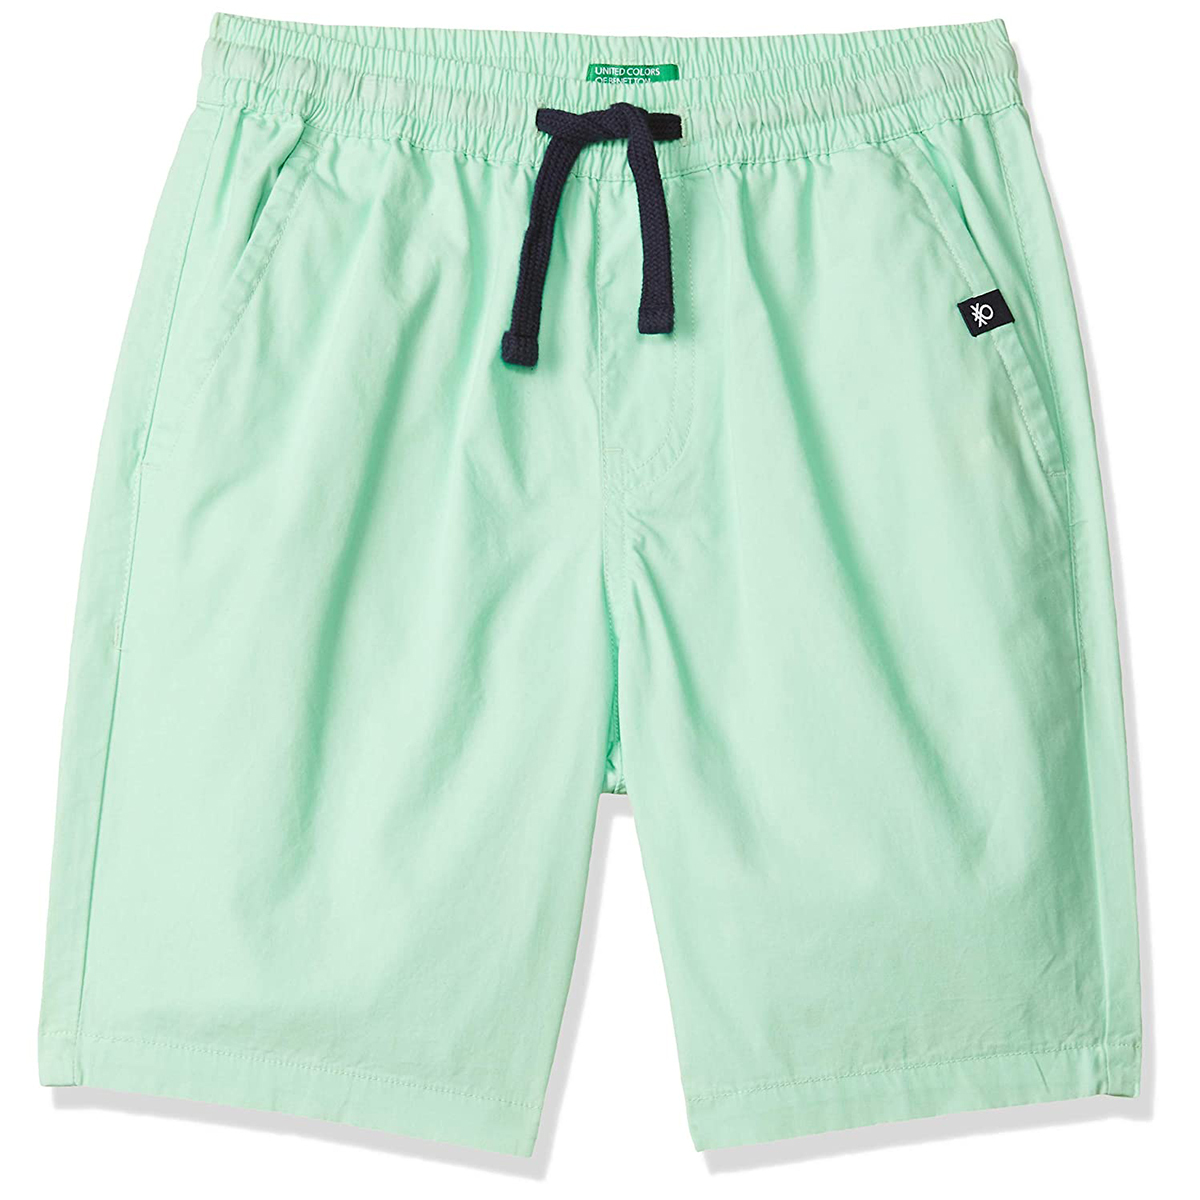 United Colors of Benetton Boy's Regular Fit Cotton Shorts- Green